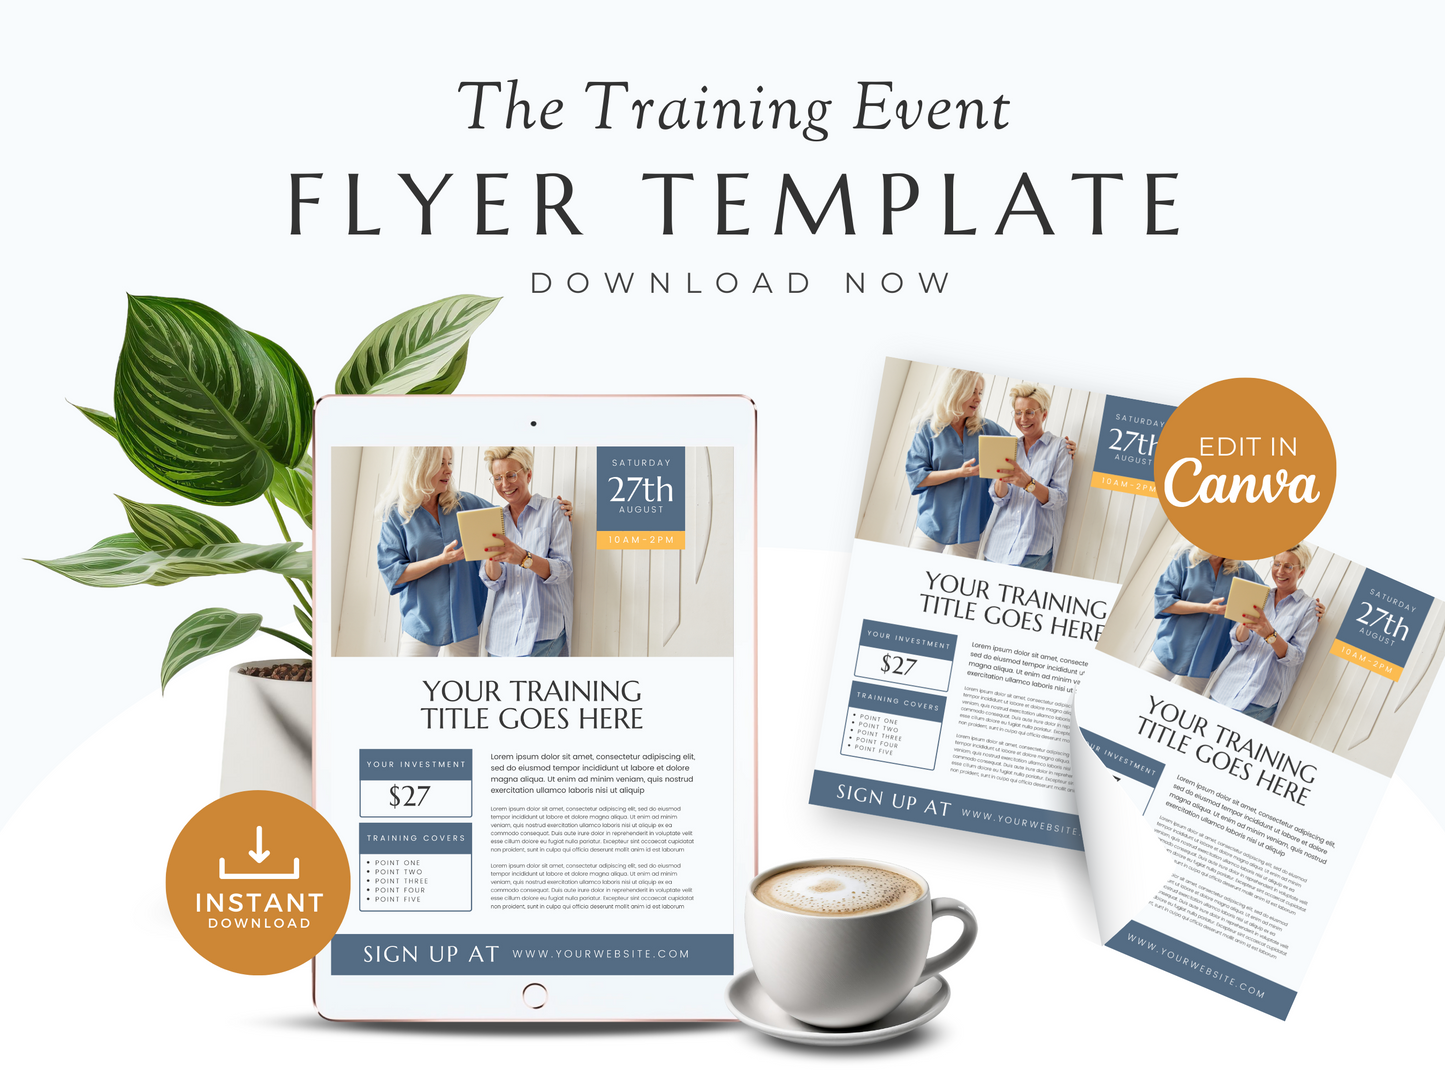 The Training Event Flyer Template